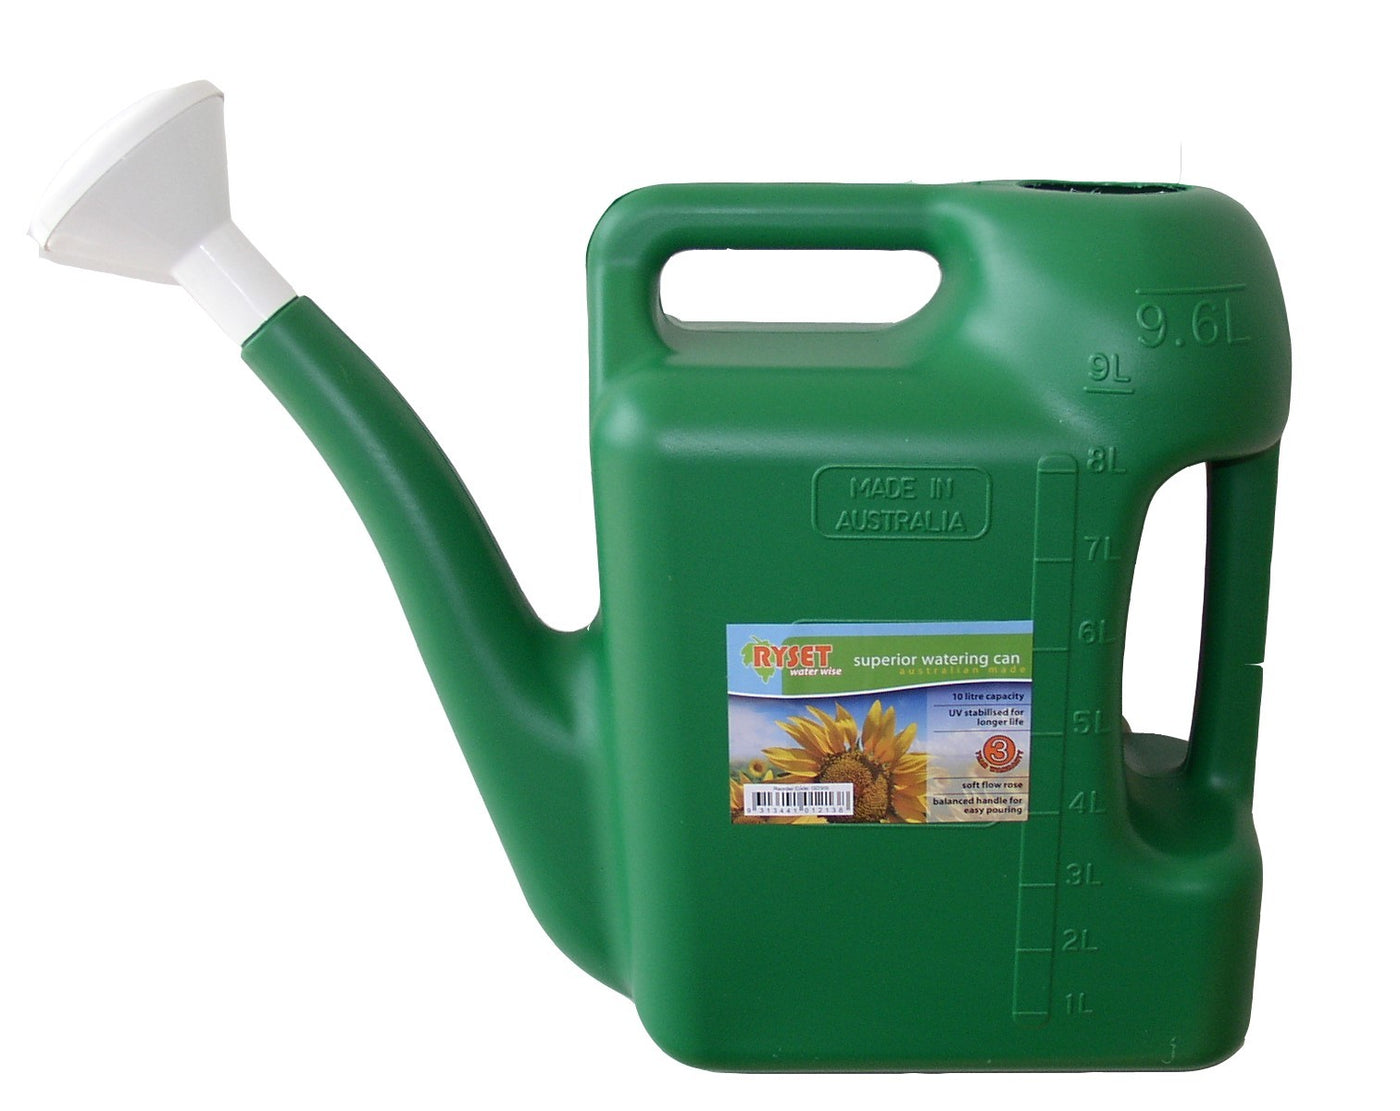 RYSET WATERING CAN 9L - UV STABILISED